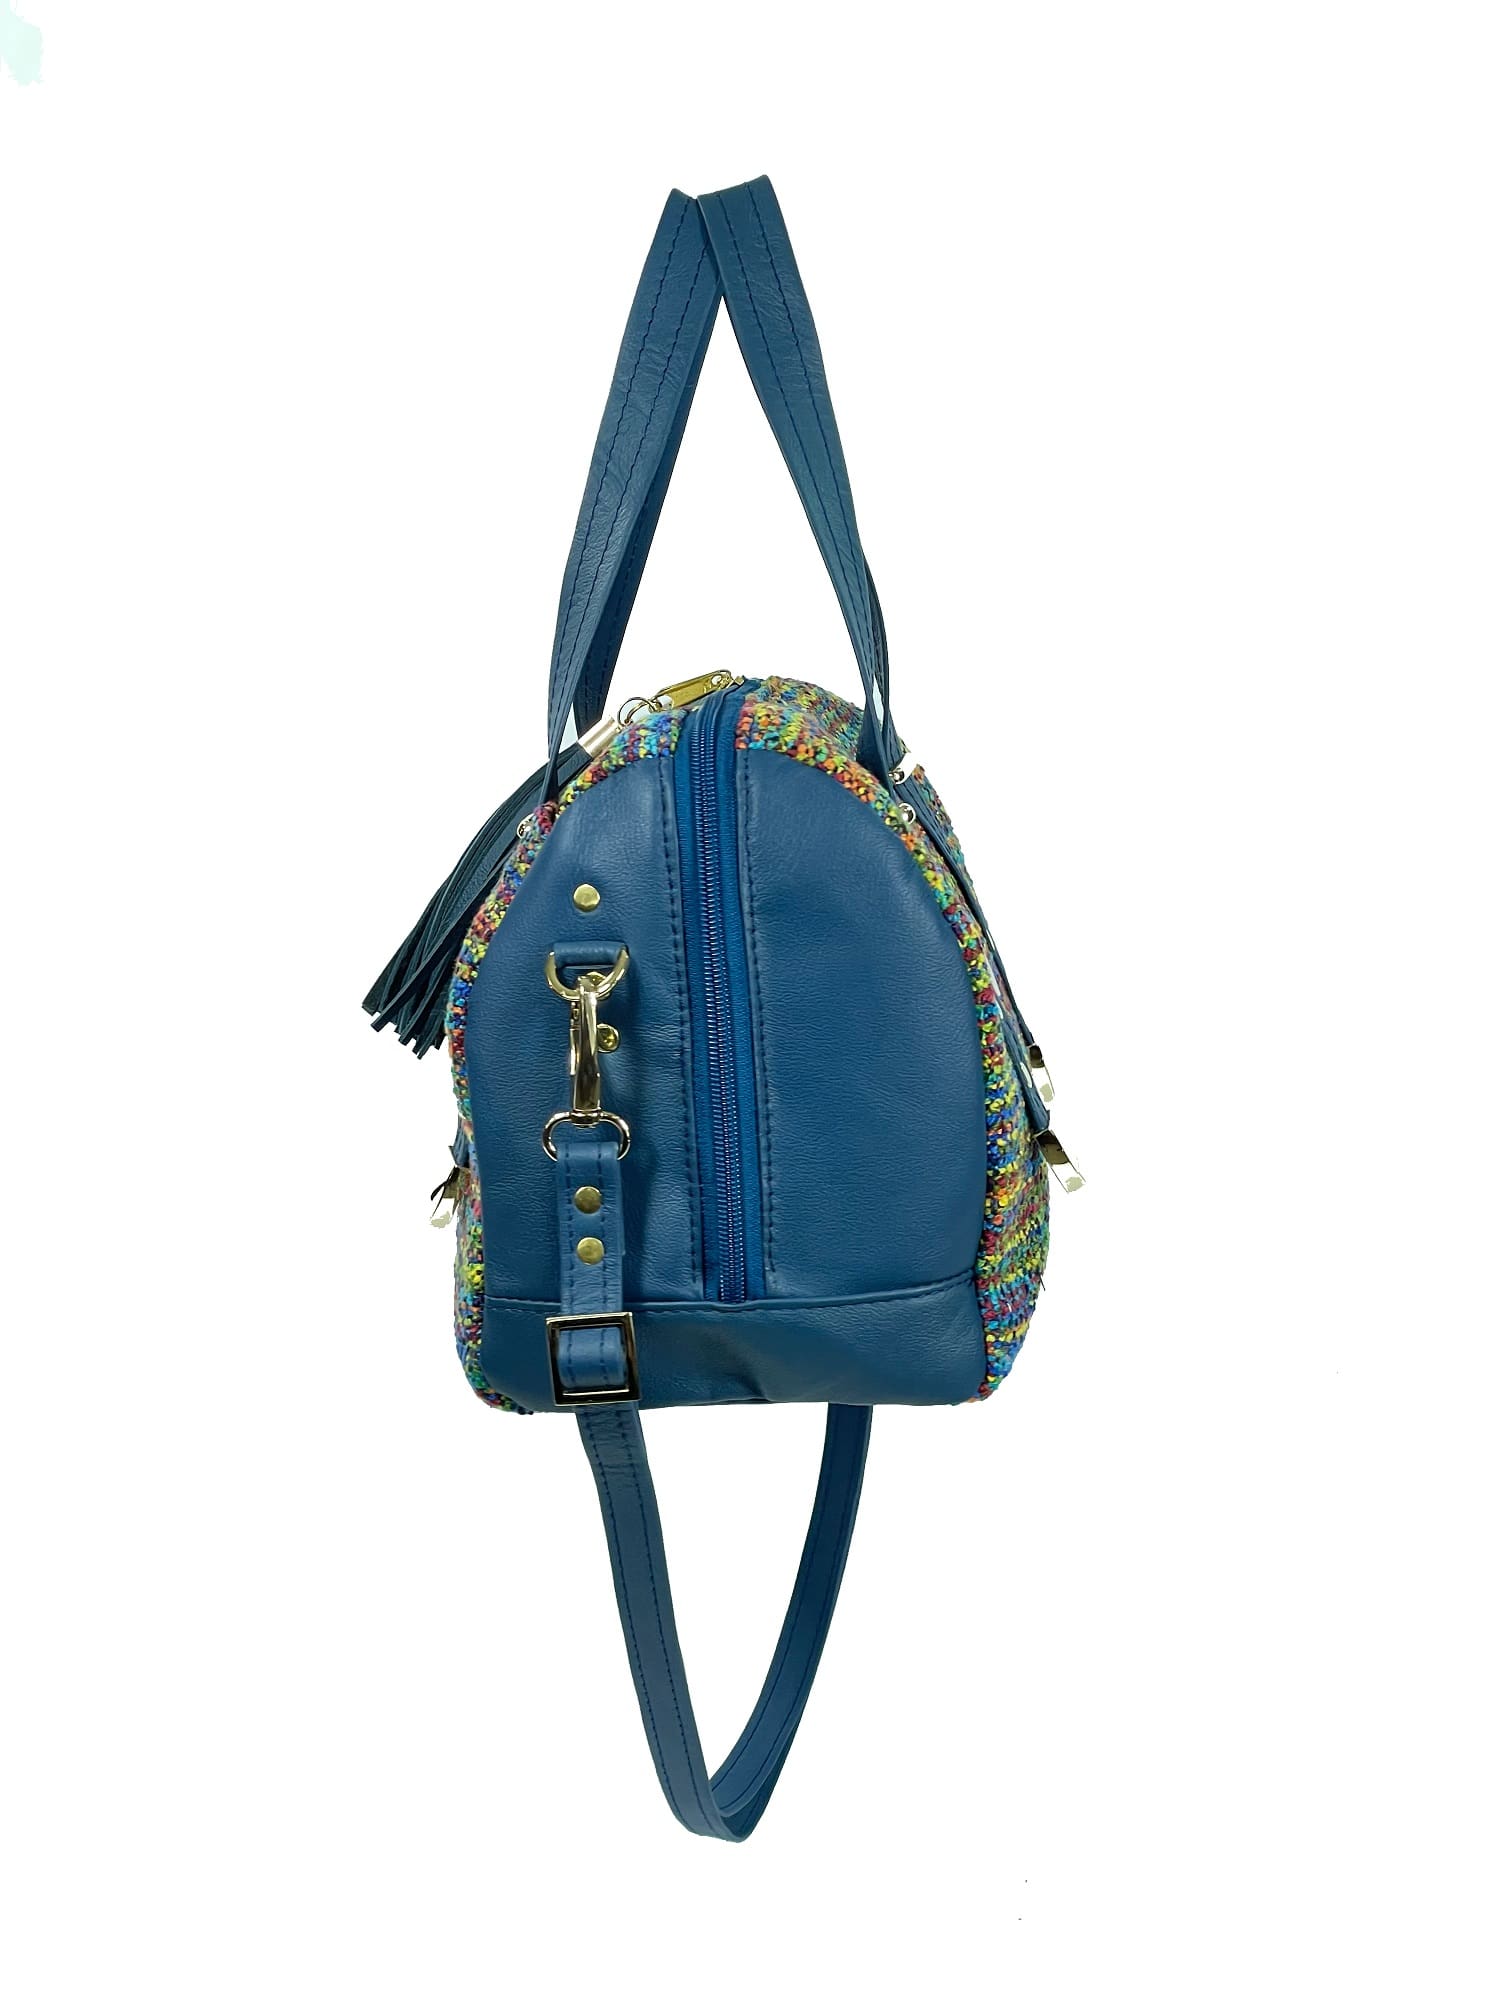 Danielle Barrel Bag Rainbow Tweed and Blue Leather side view